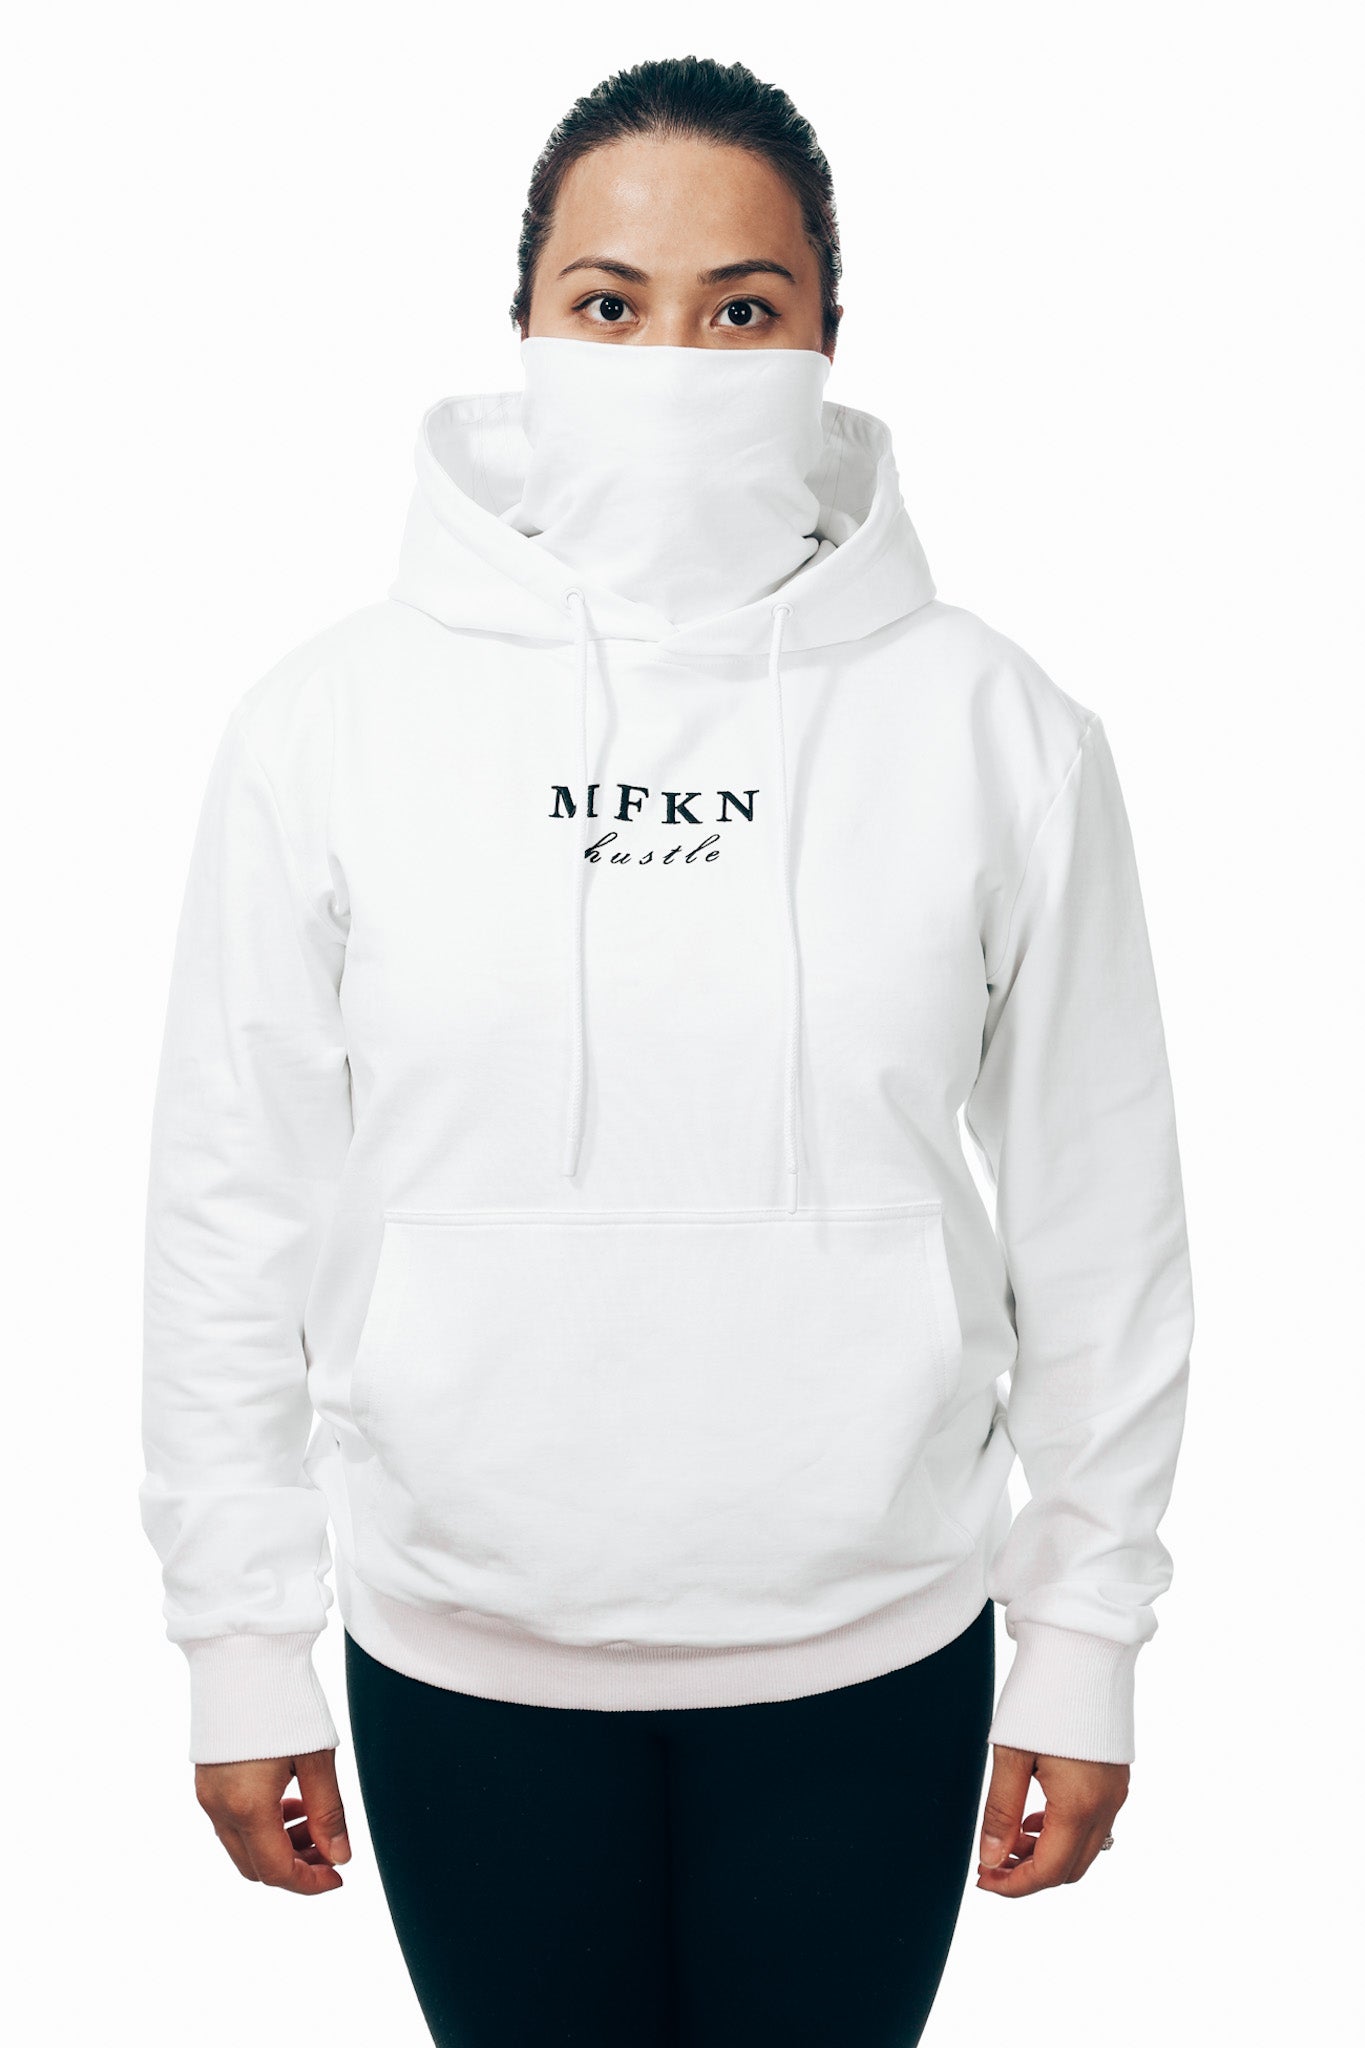 A front view portrait of a woman wearing a white MFKN Hustle face mask hoodie.